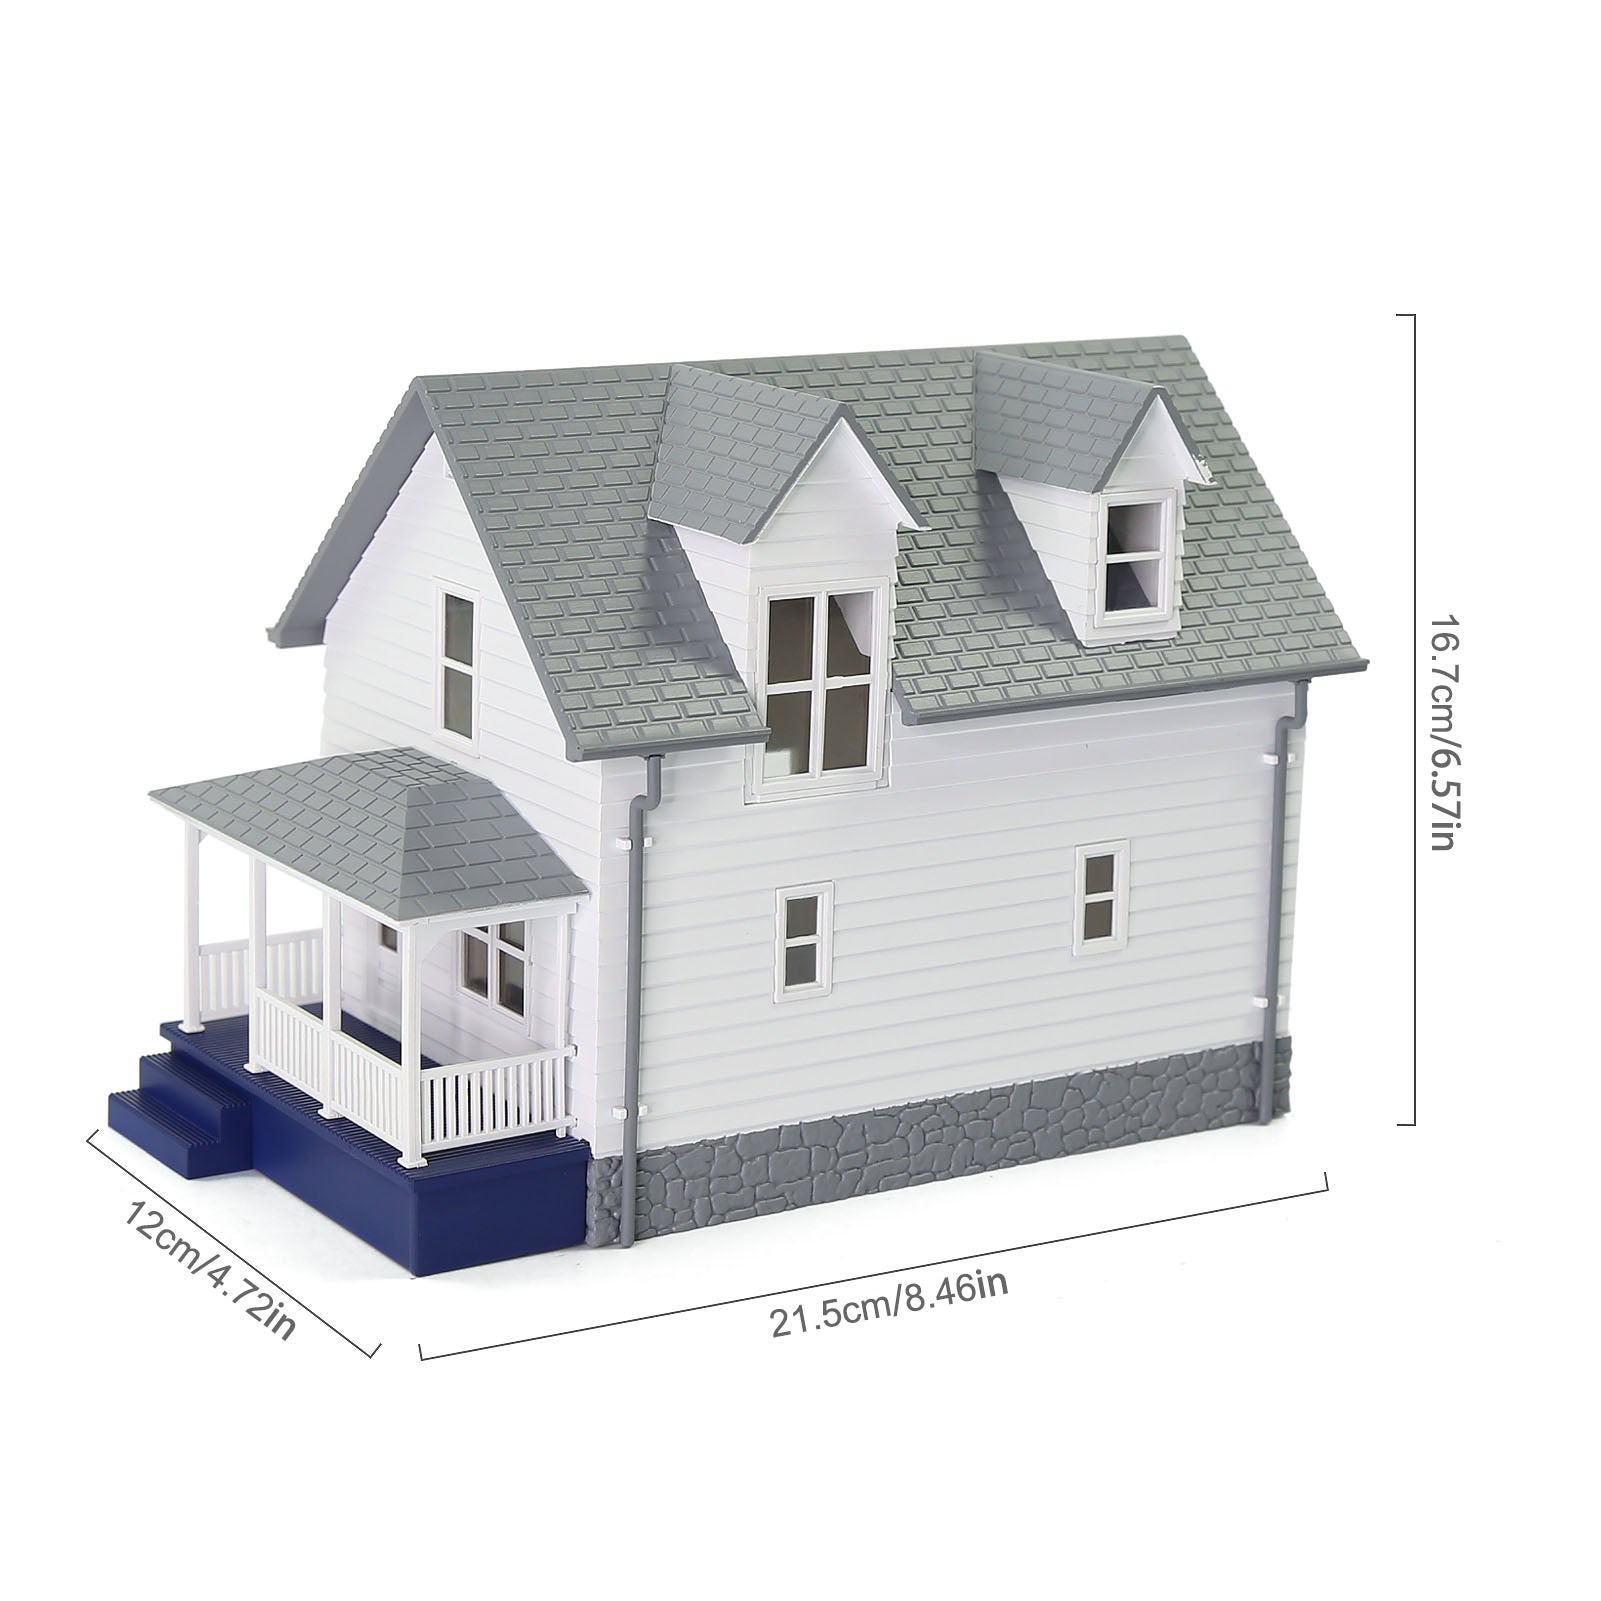 JZO01 1pc O Scale 1:50 Model House Assembled Building Architectural